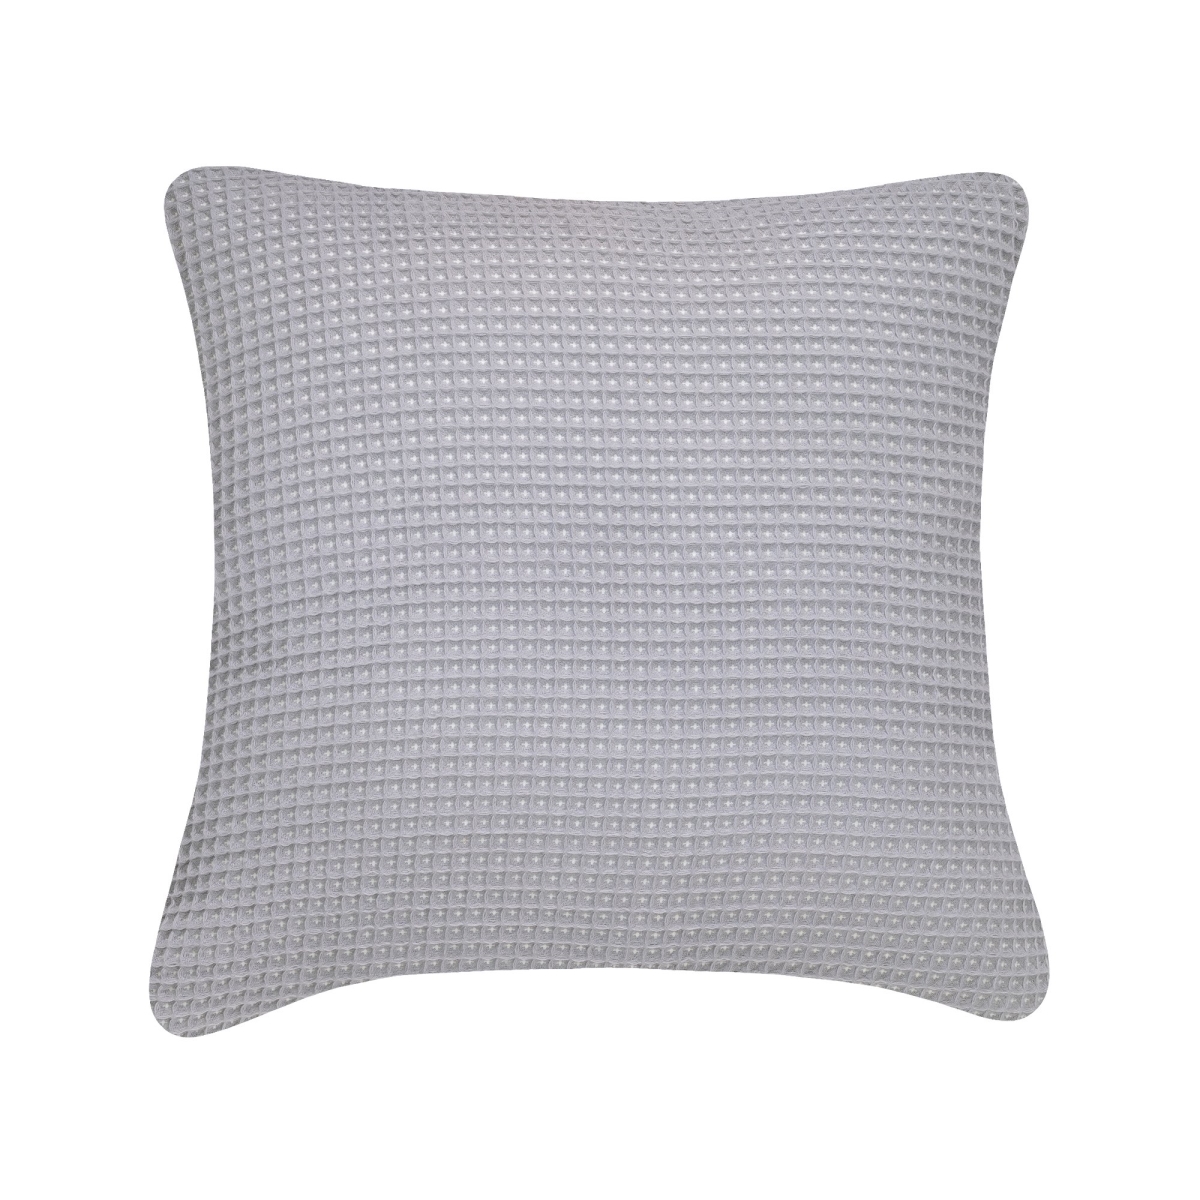 20 X 20 In. Waffle Decorative Cushion, White & Grey - 100 Percent Duck Feather